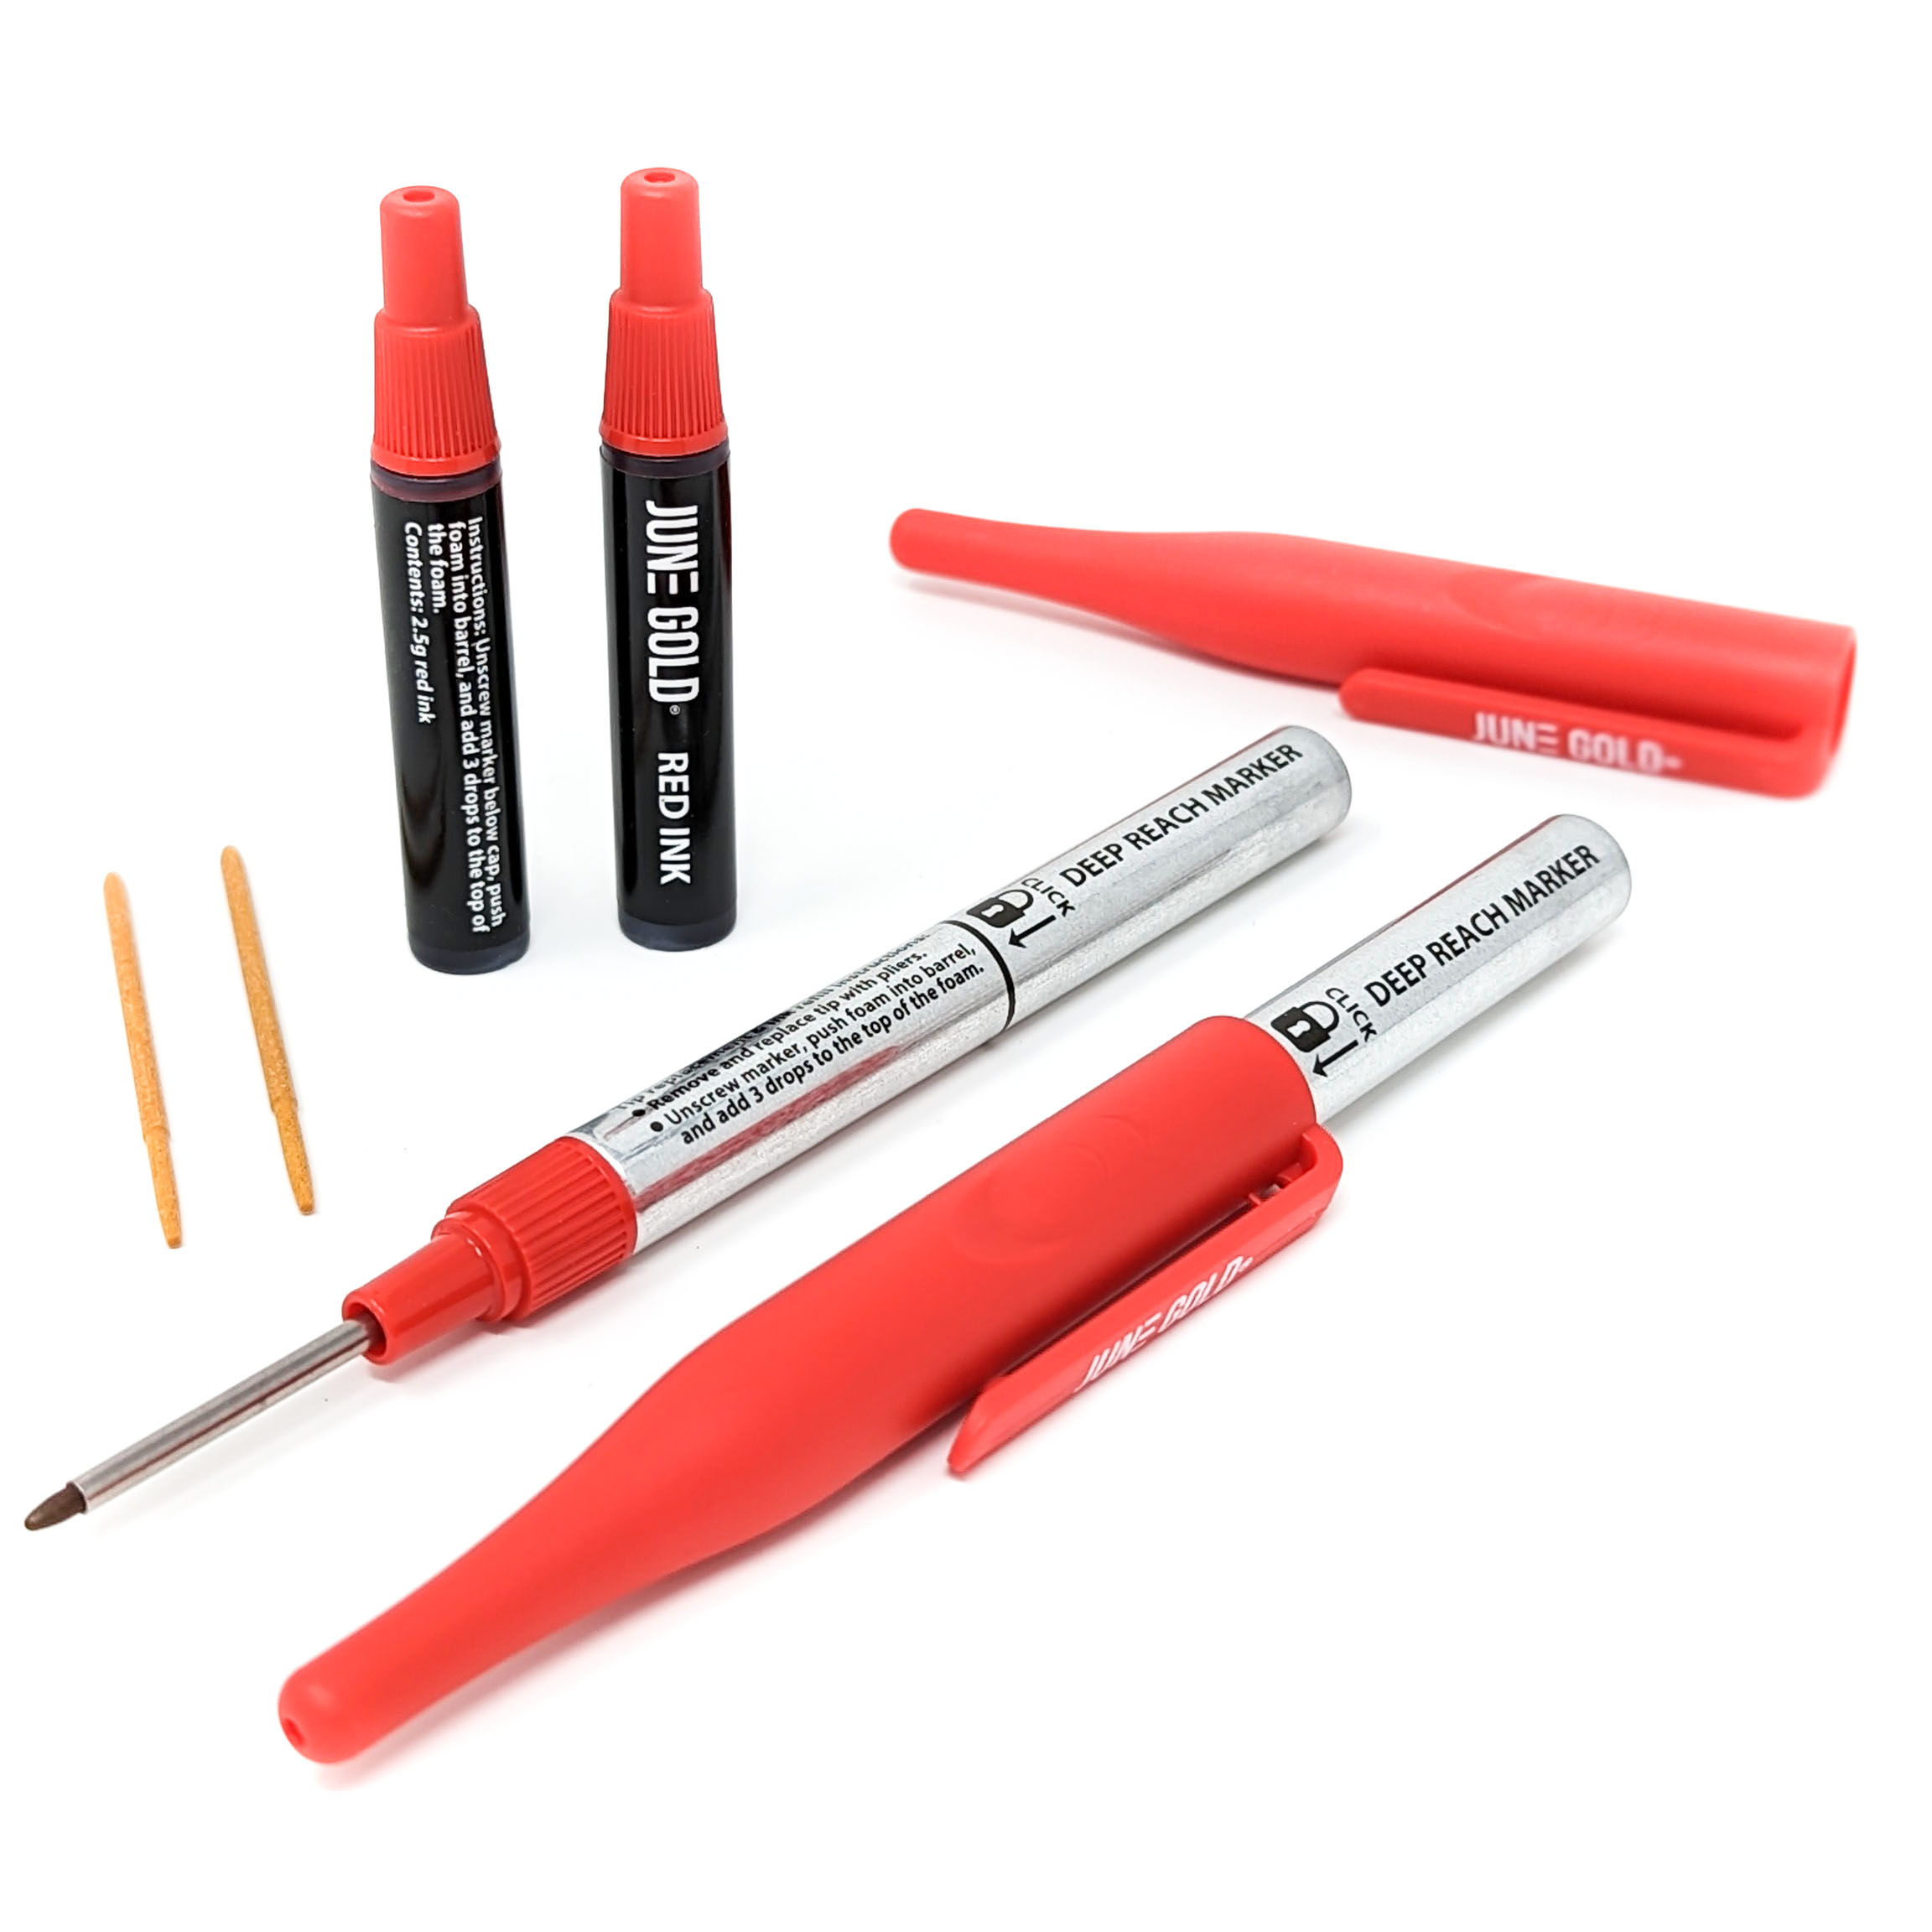 2 Red Deep Reach Markers, 2 Ink Refill Bottles, 2 Tip Replacements